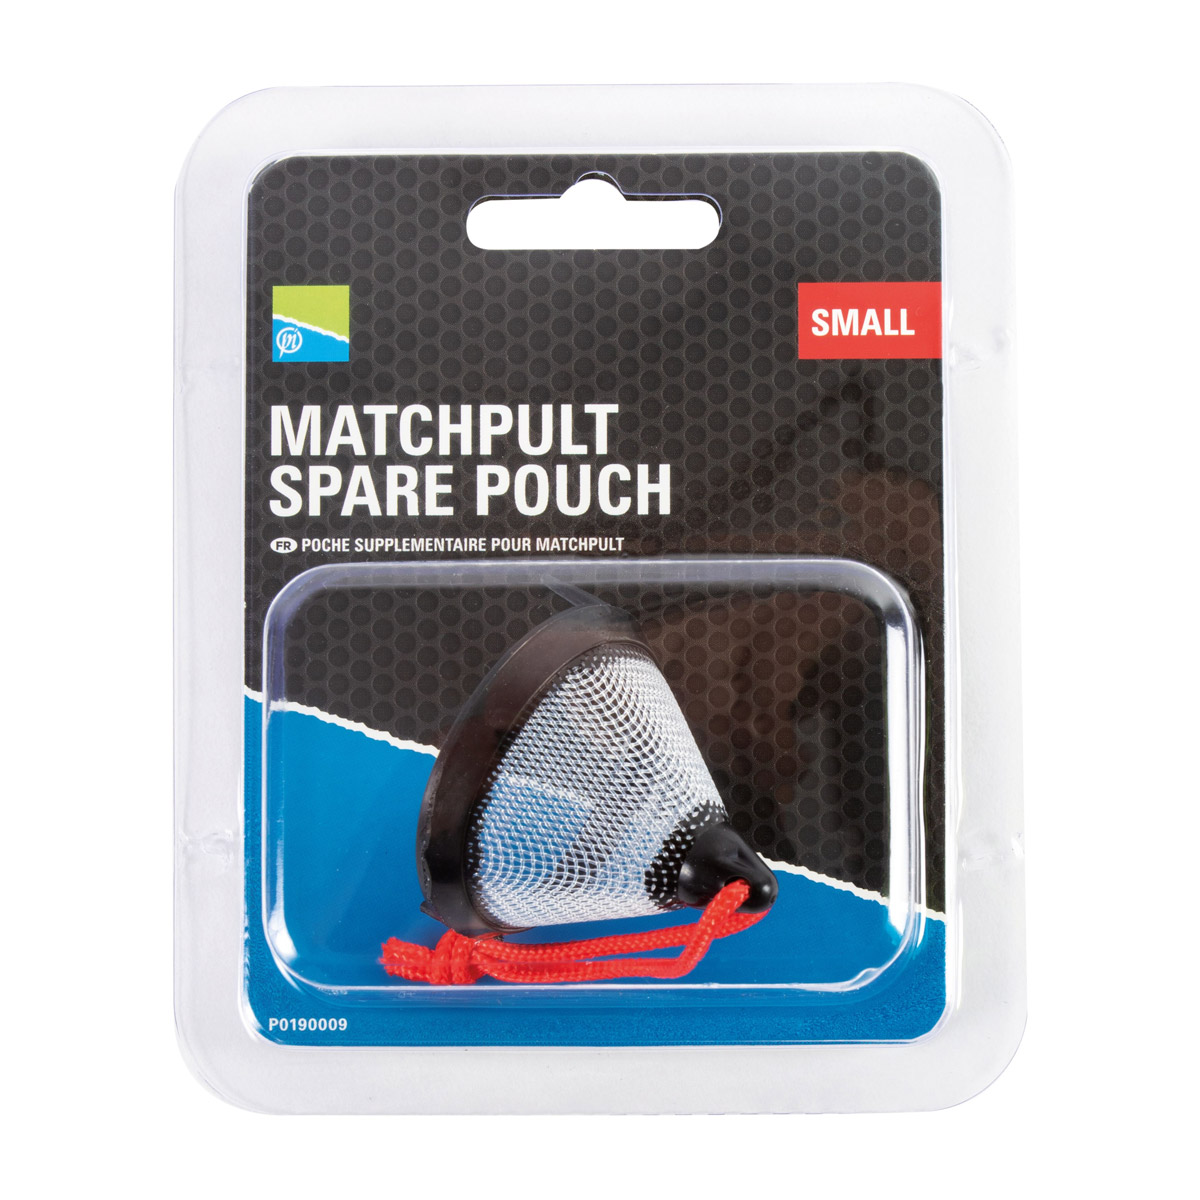 Preston Innovations Small Matchpult Spare Pouch